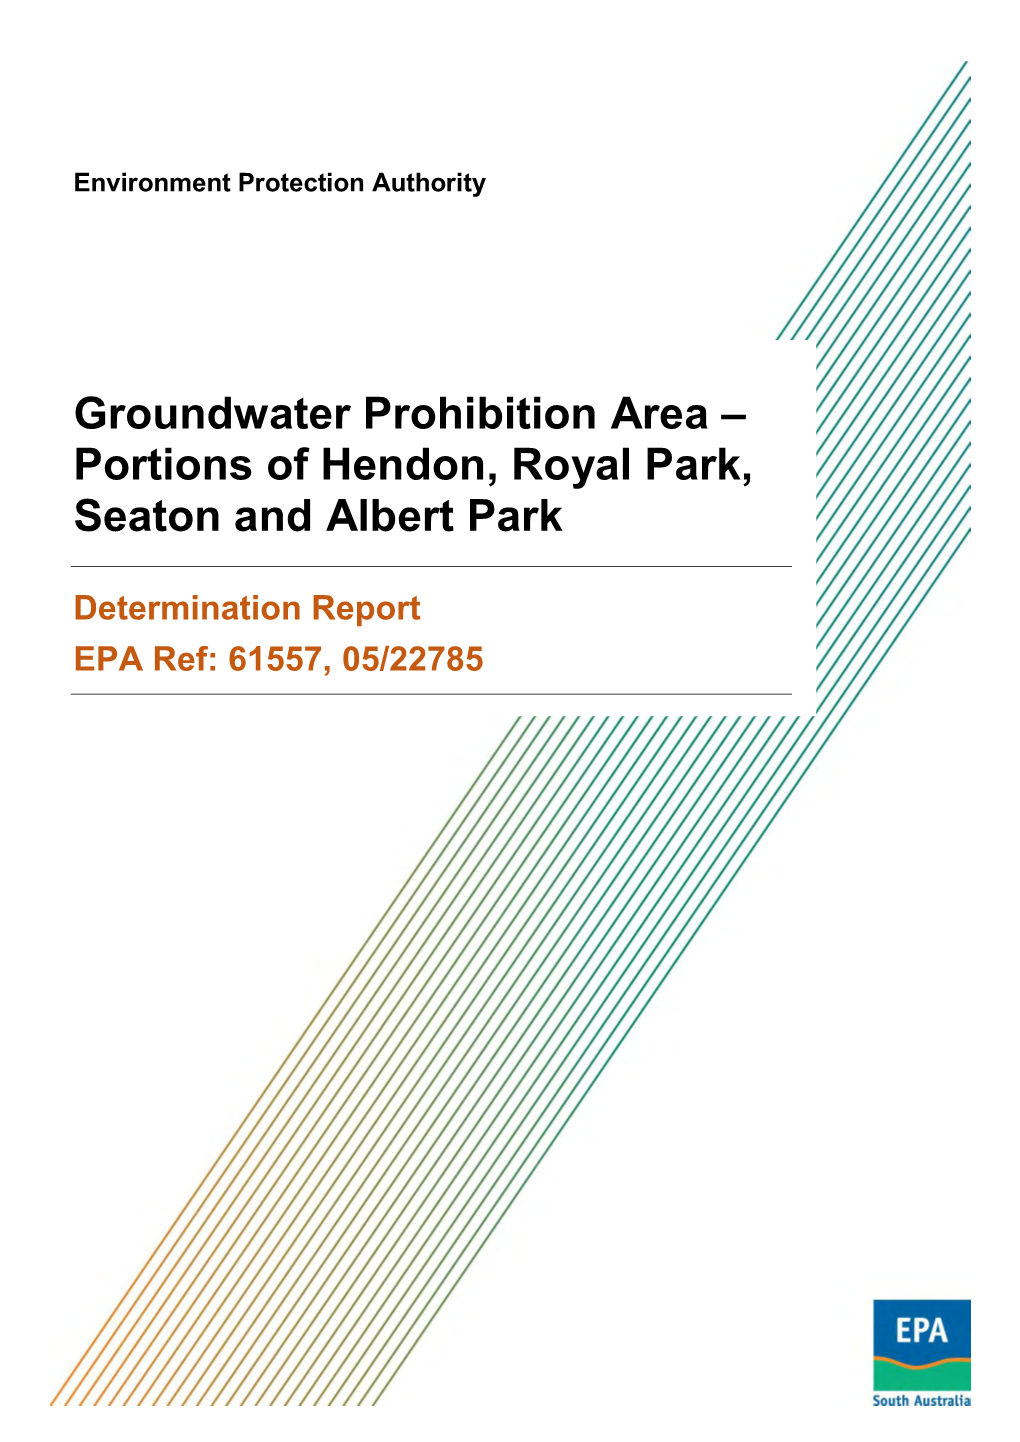 Groundwater Prohibition Area – Portions of Hendon, Royal Park, Seaton and Albert Park